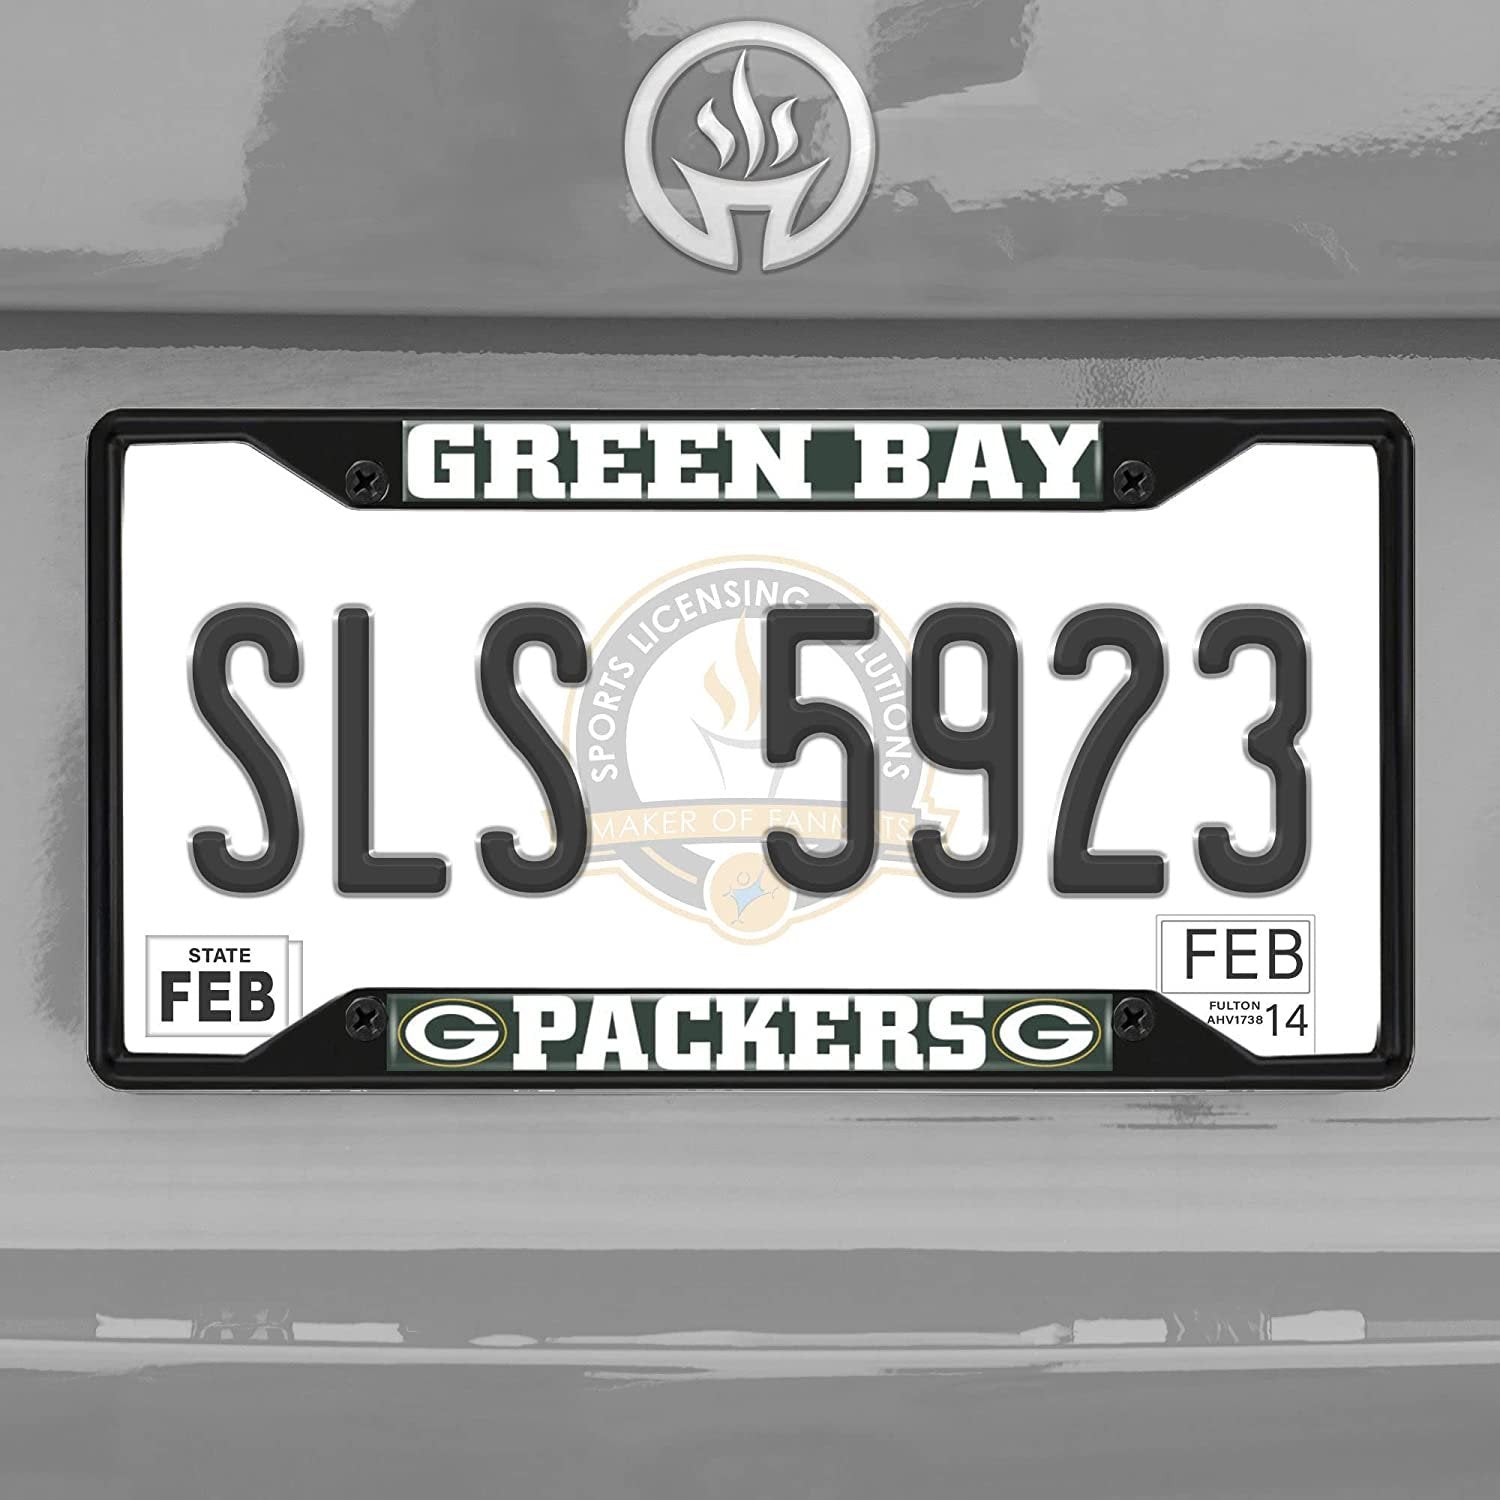 Green Bay Packers Black Metal License Plate Frame Tag Cover, 6x12 Inch